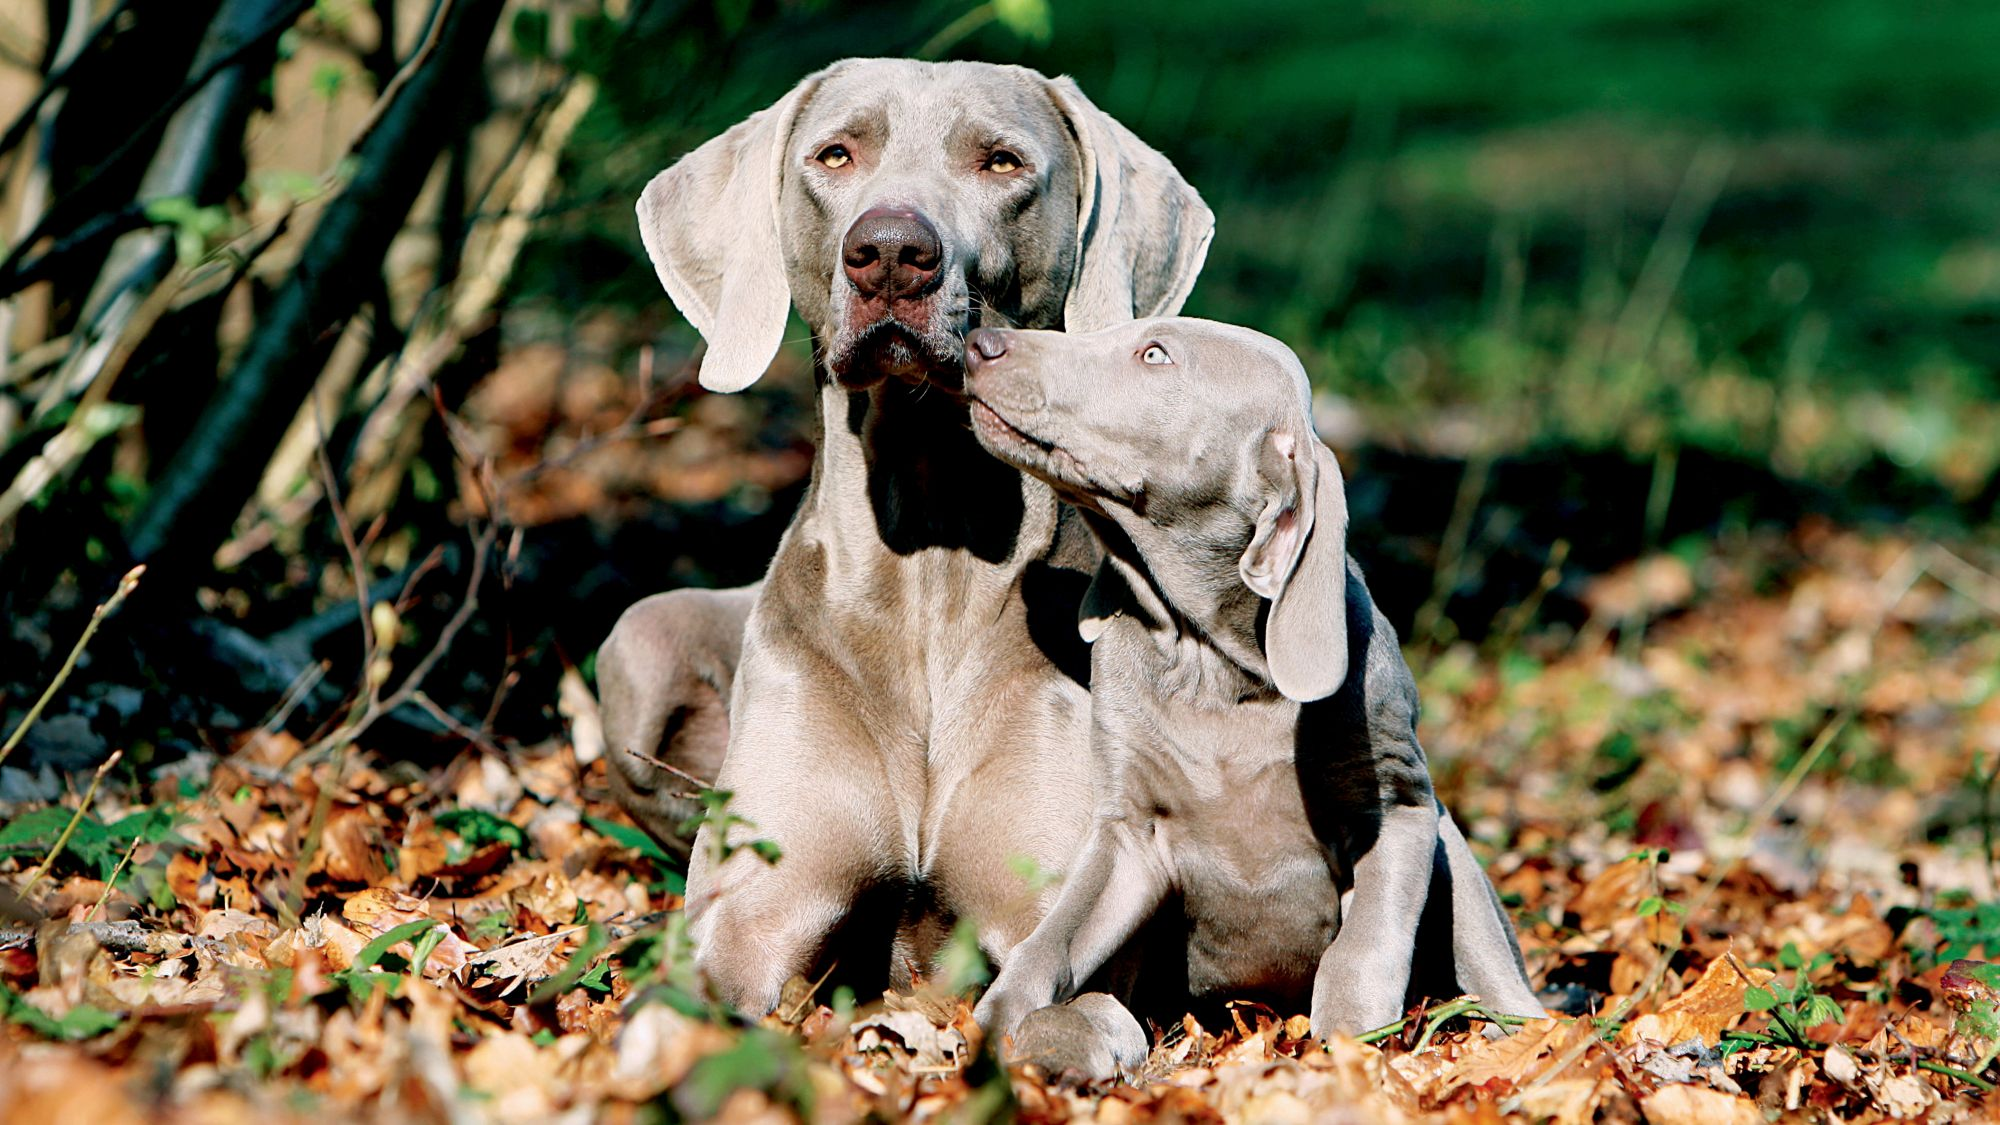 An adult and a puppy Weimaraner sat snuggling each other in fallen leaves